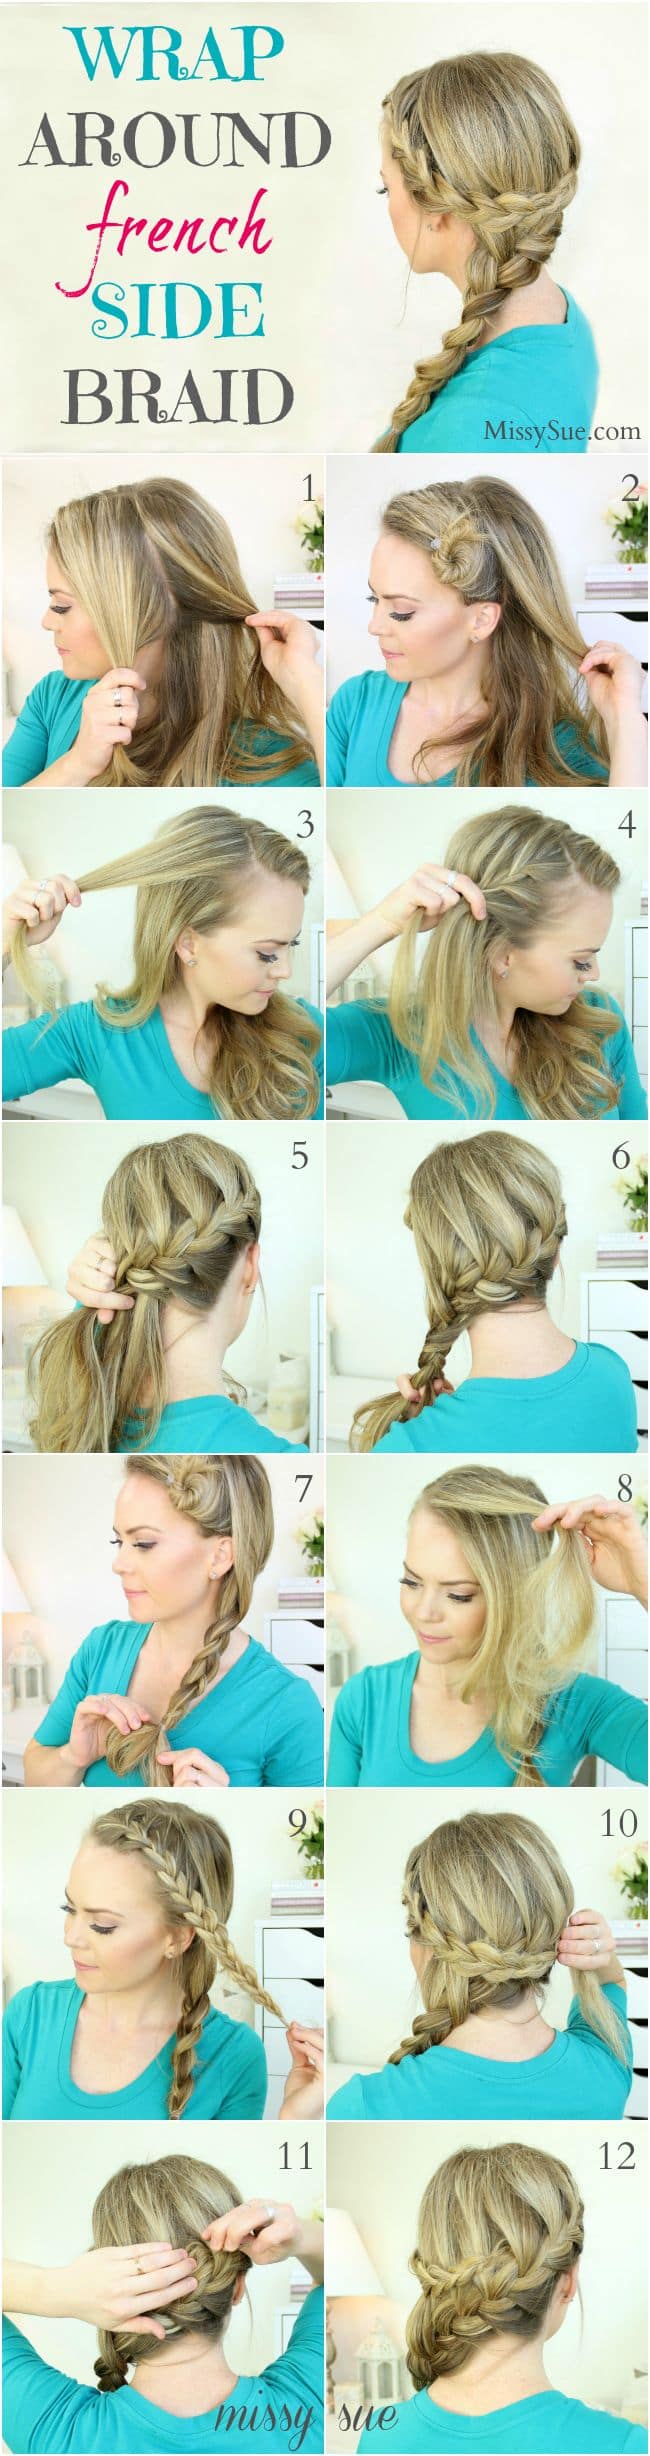 14 Fast But Super Cool Hairstyle Ideas For Busy Mornings - ALL FOR ...